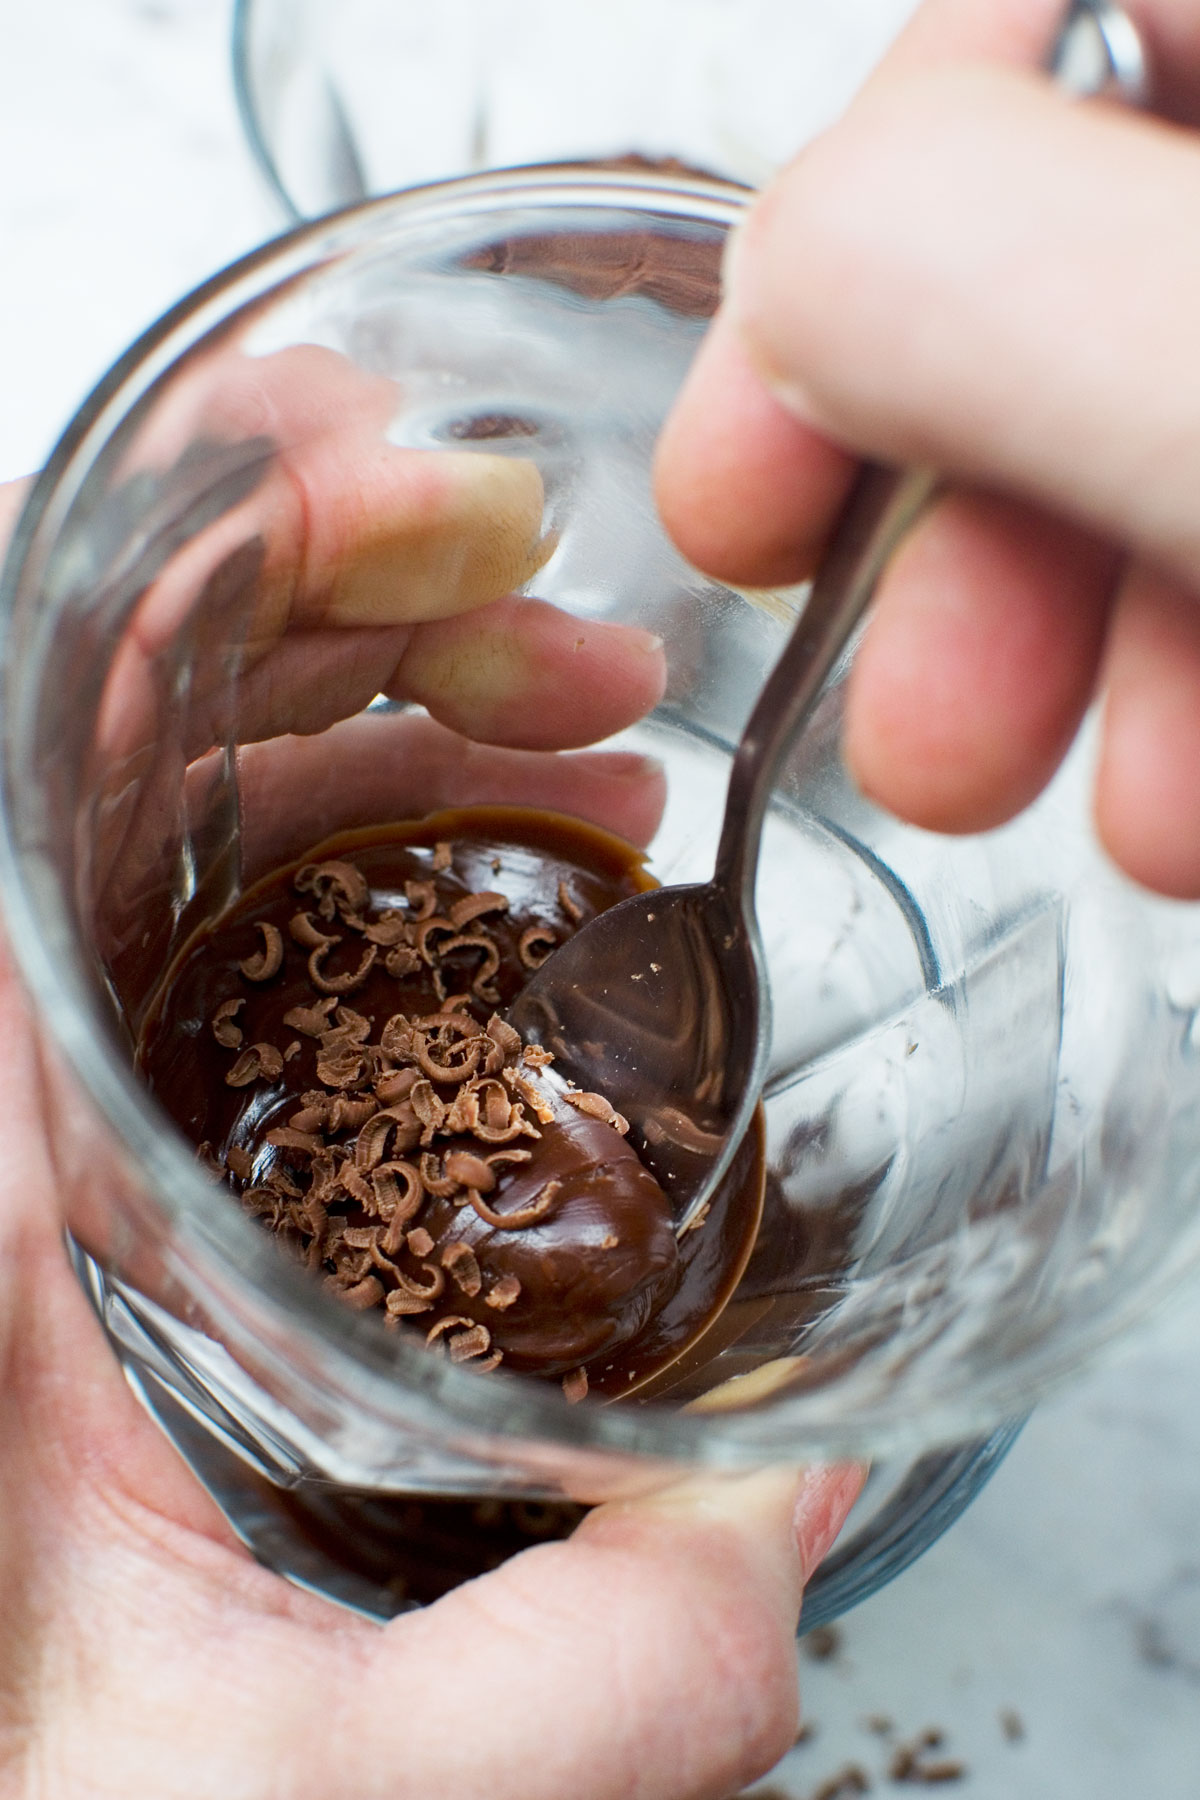 A closeup of someone holding a small glass and eating a chocolate pot with a spoon